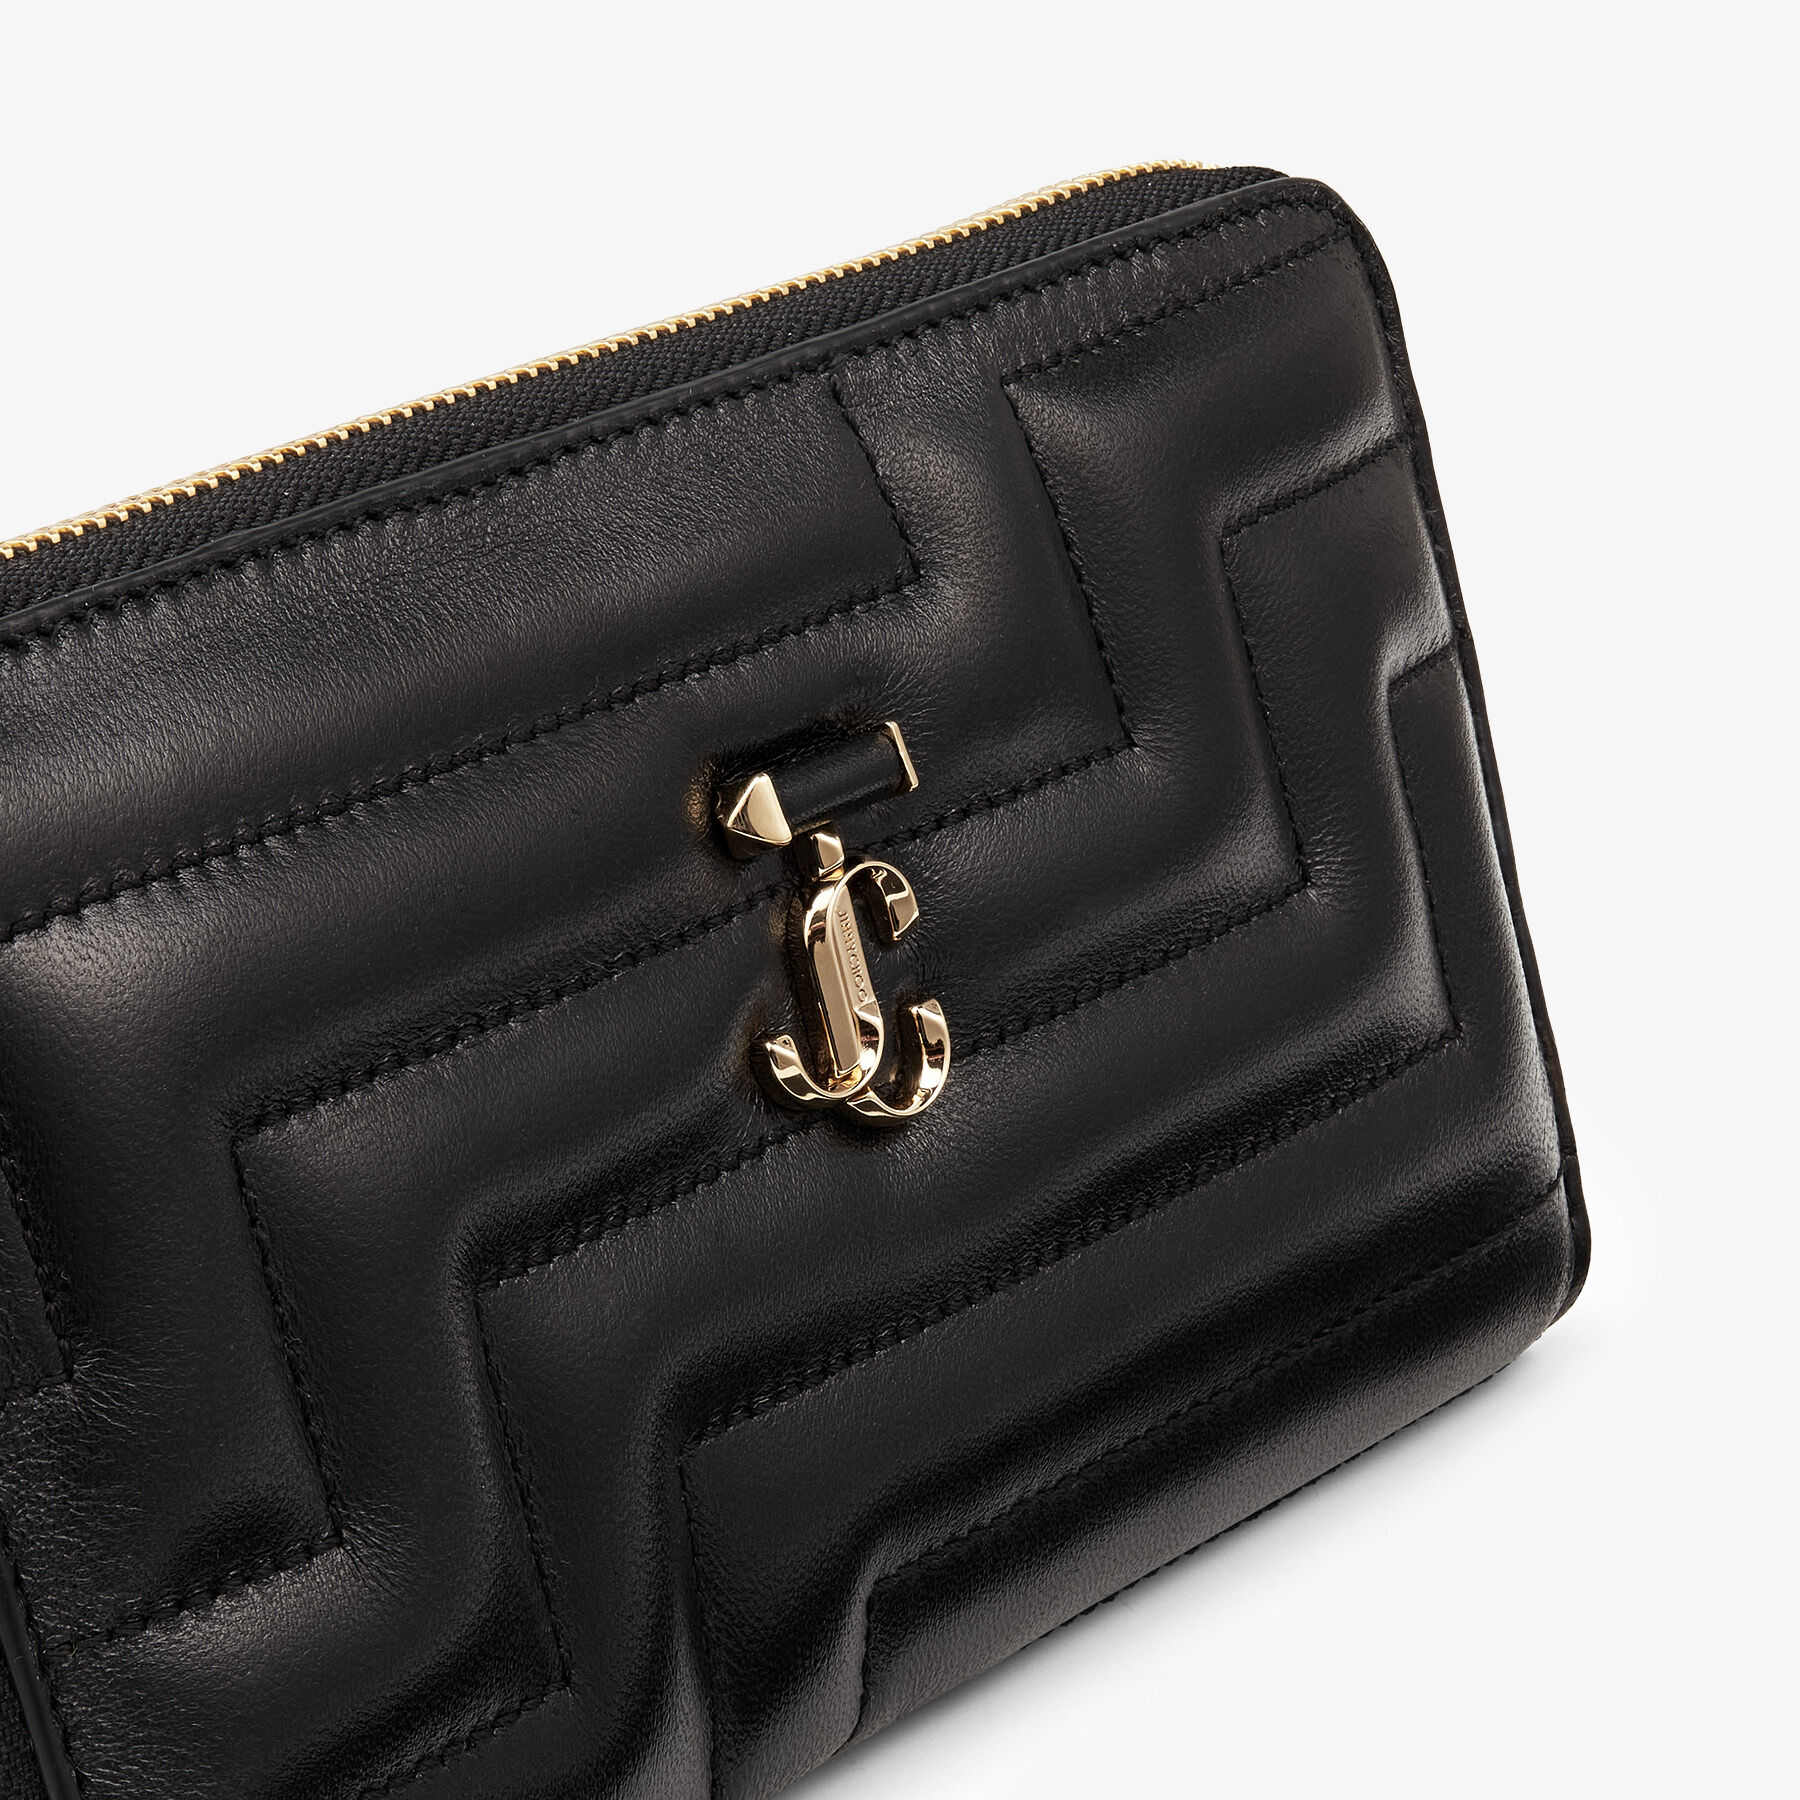 Black Avenue Nappa Leather Wallet with JC Emblem | PIPPA | Autumn 